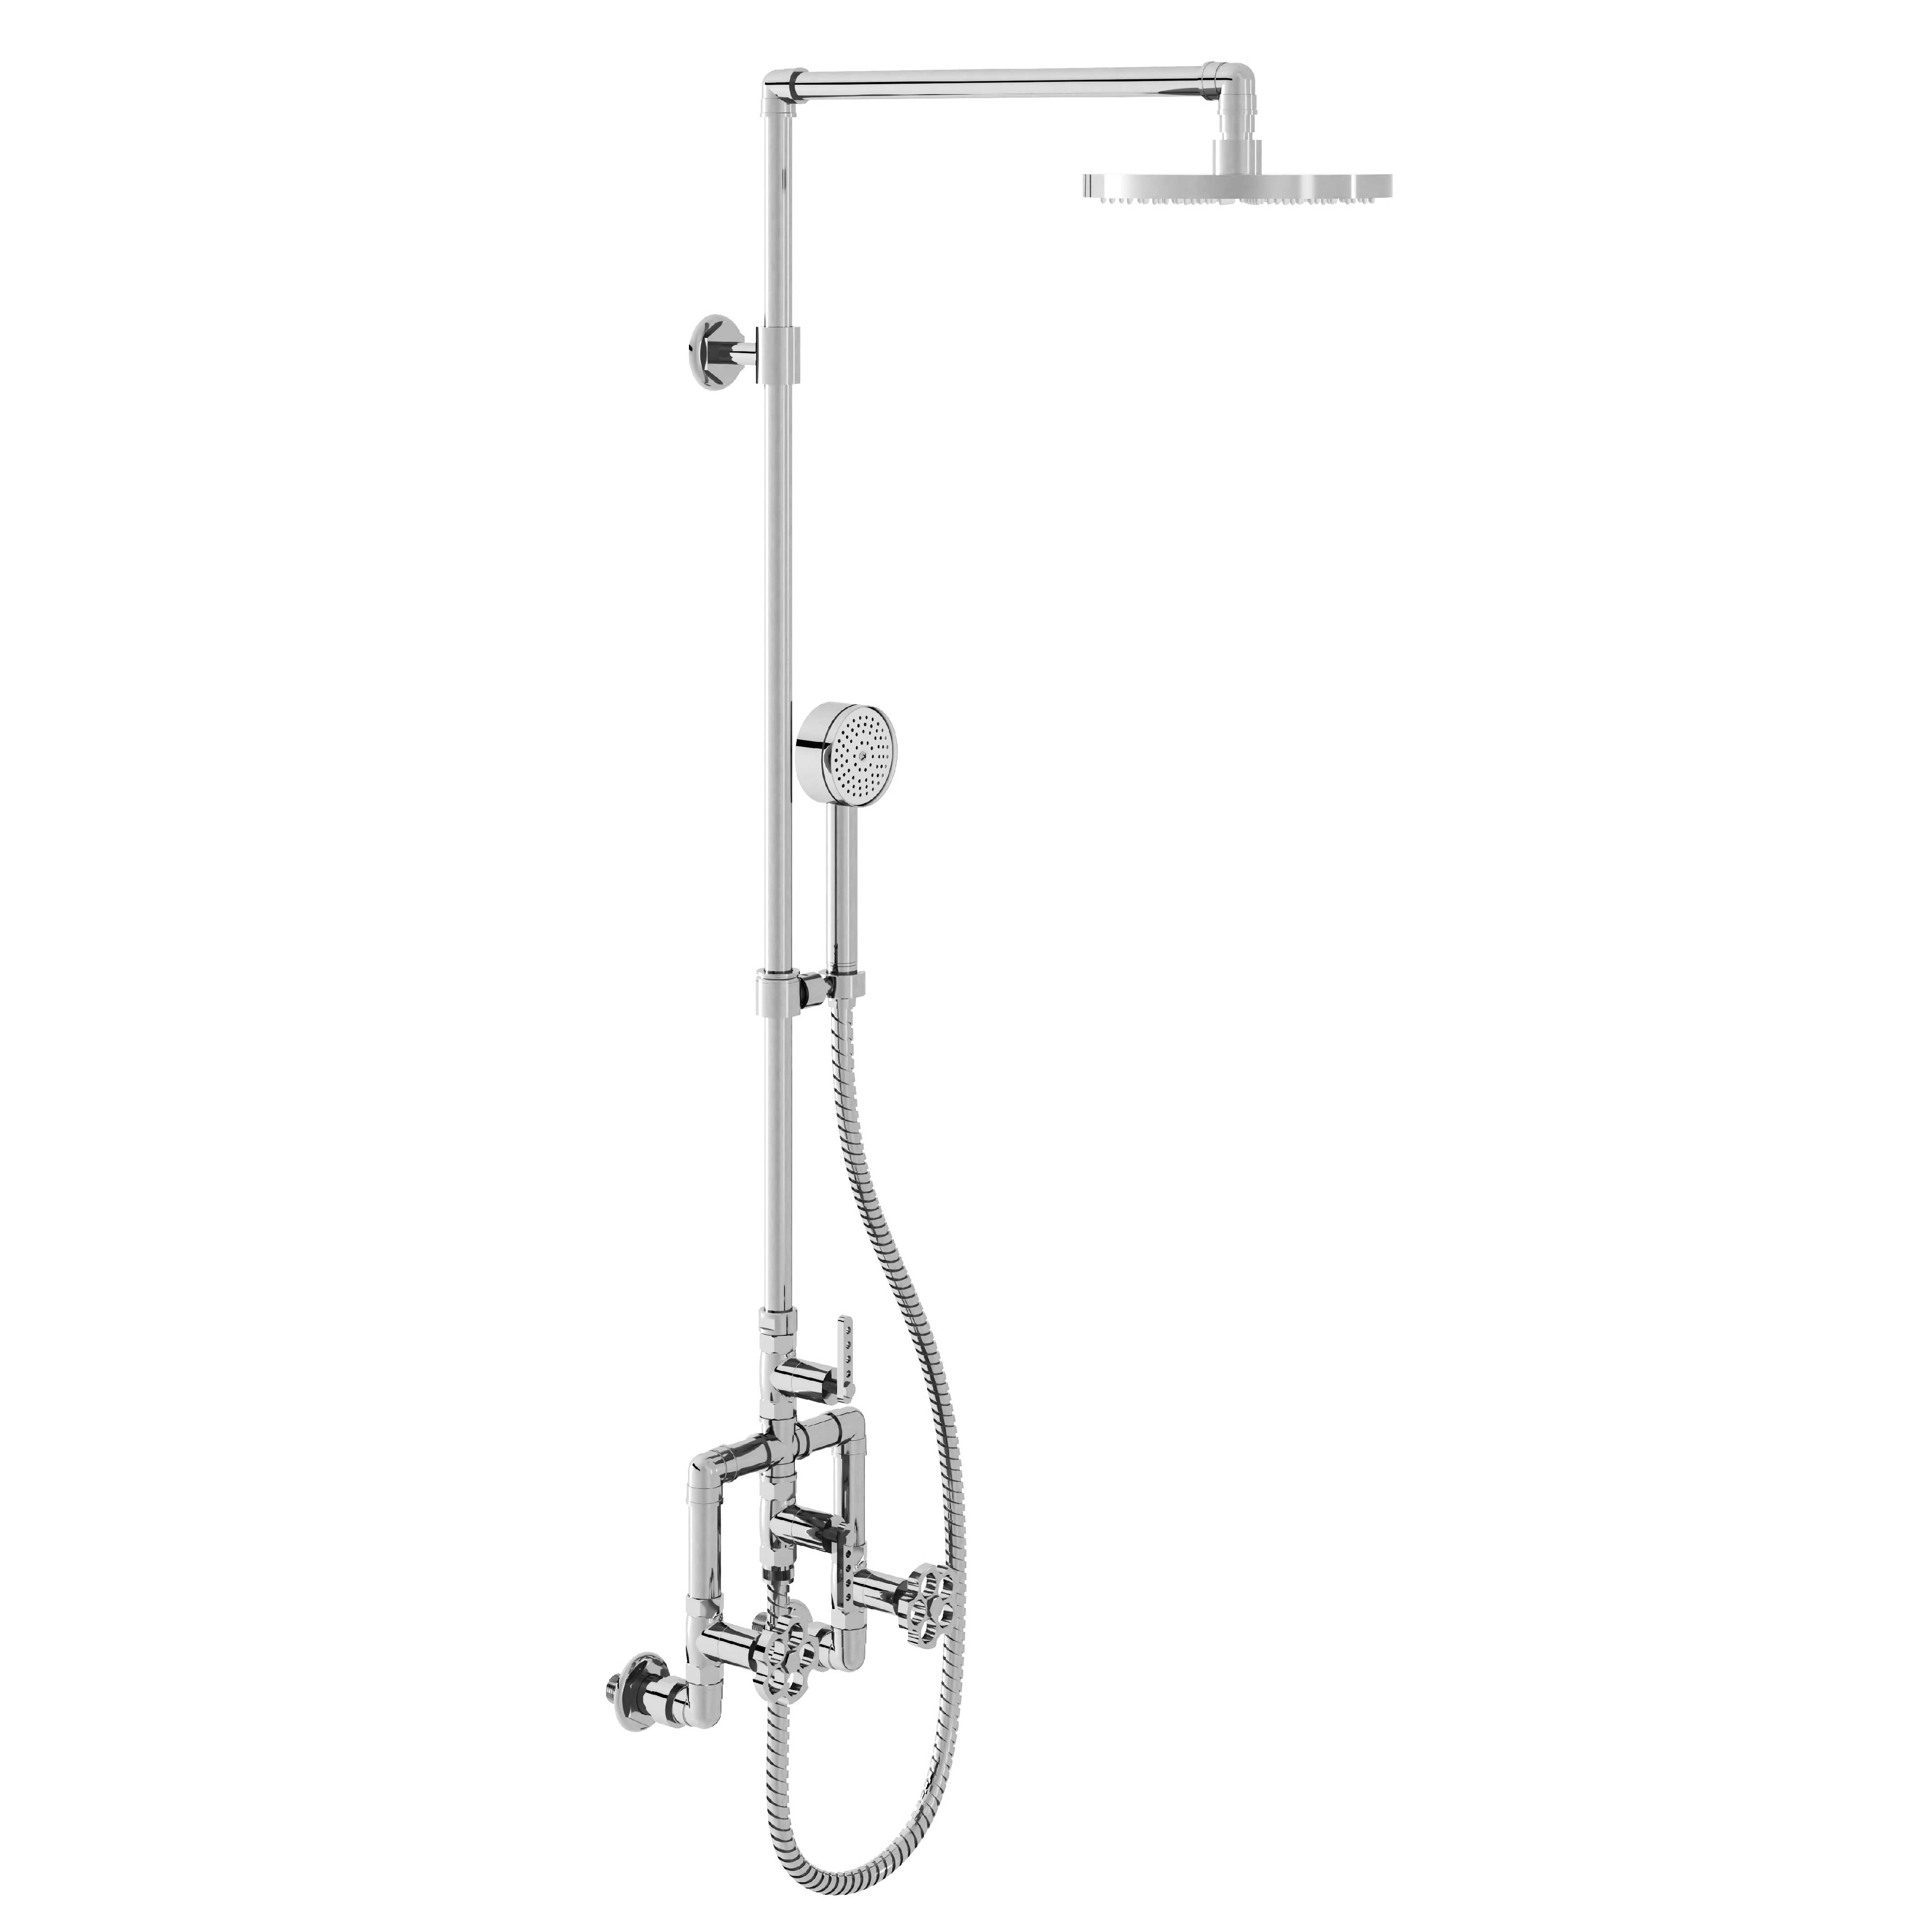 M81-2204 Shower mixer with column, anti-scaling